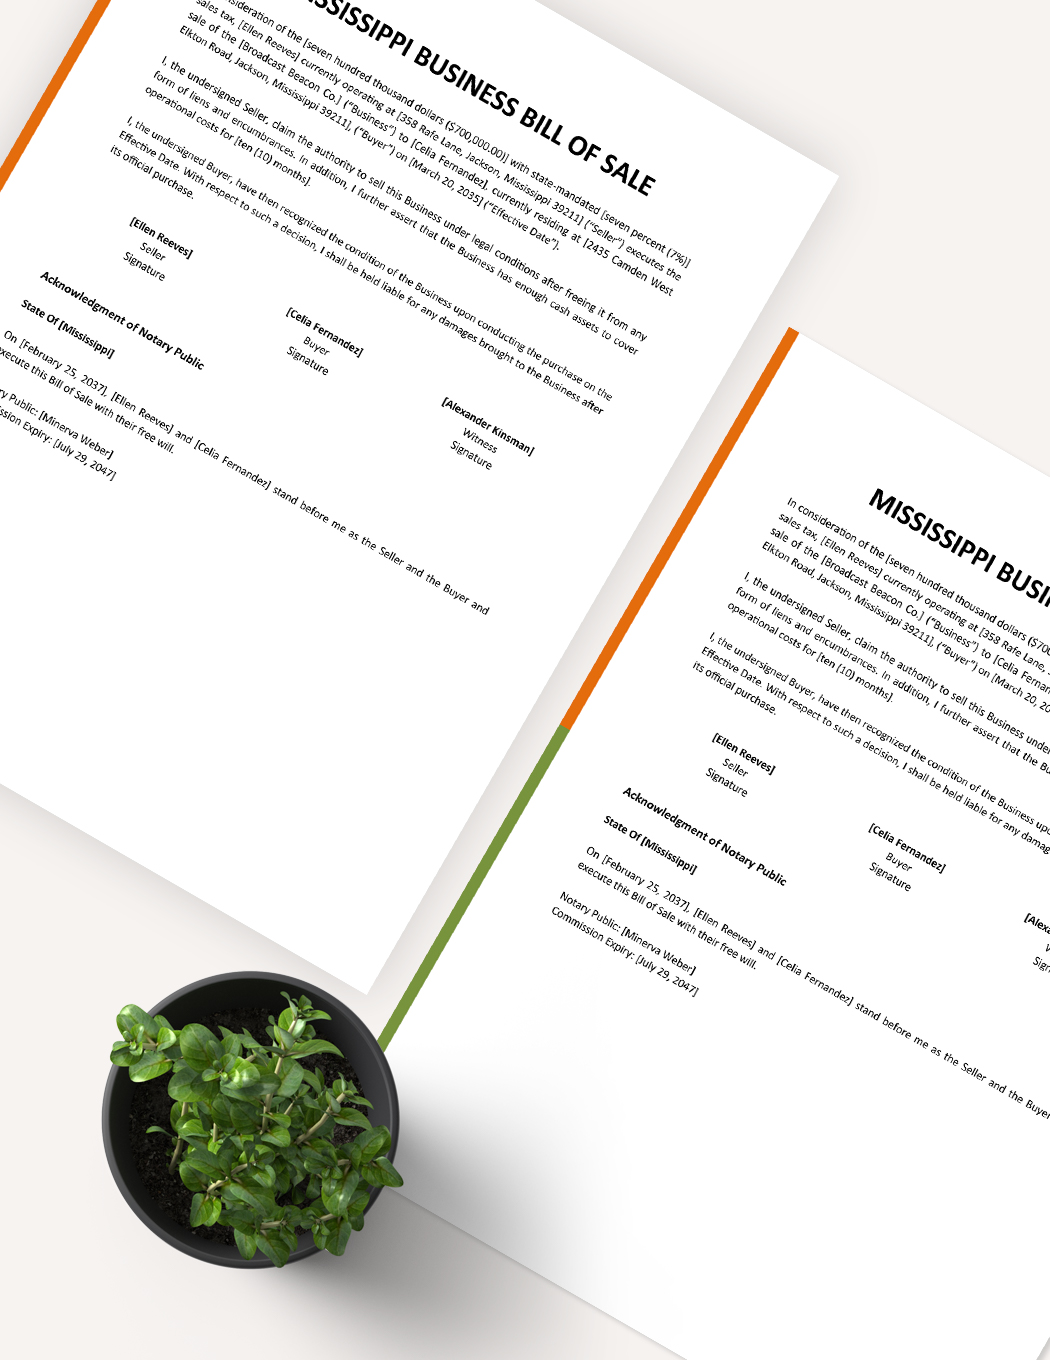 Mississippi Business Bill Of Sale Template